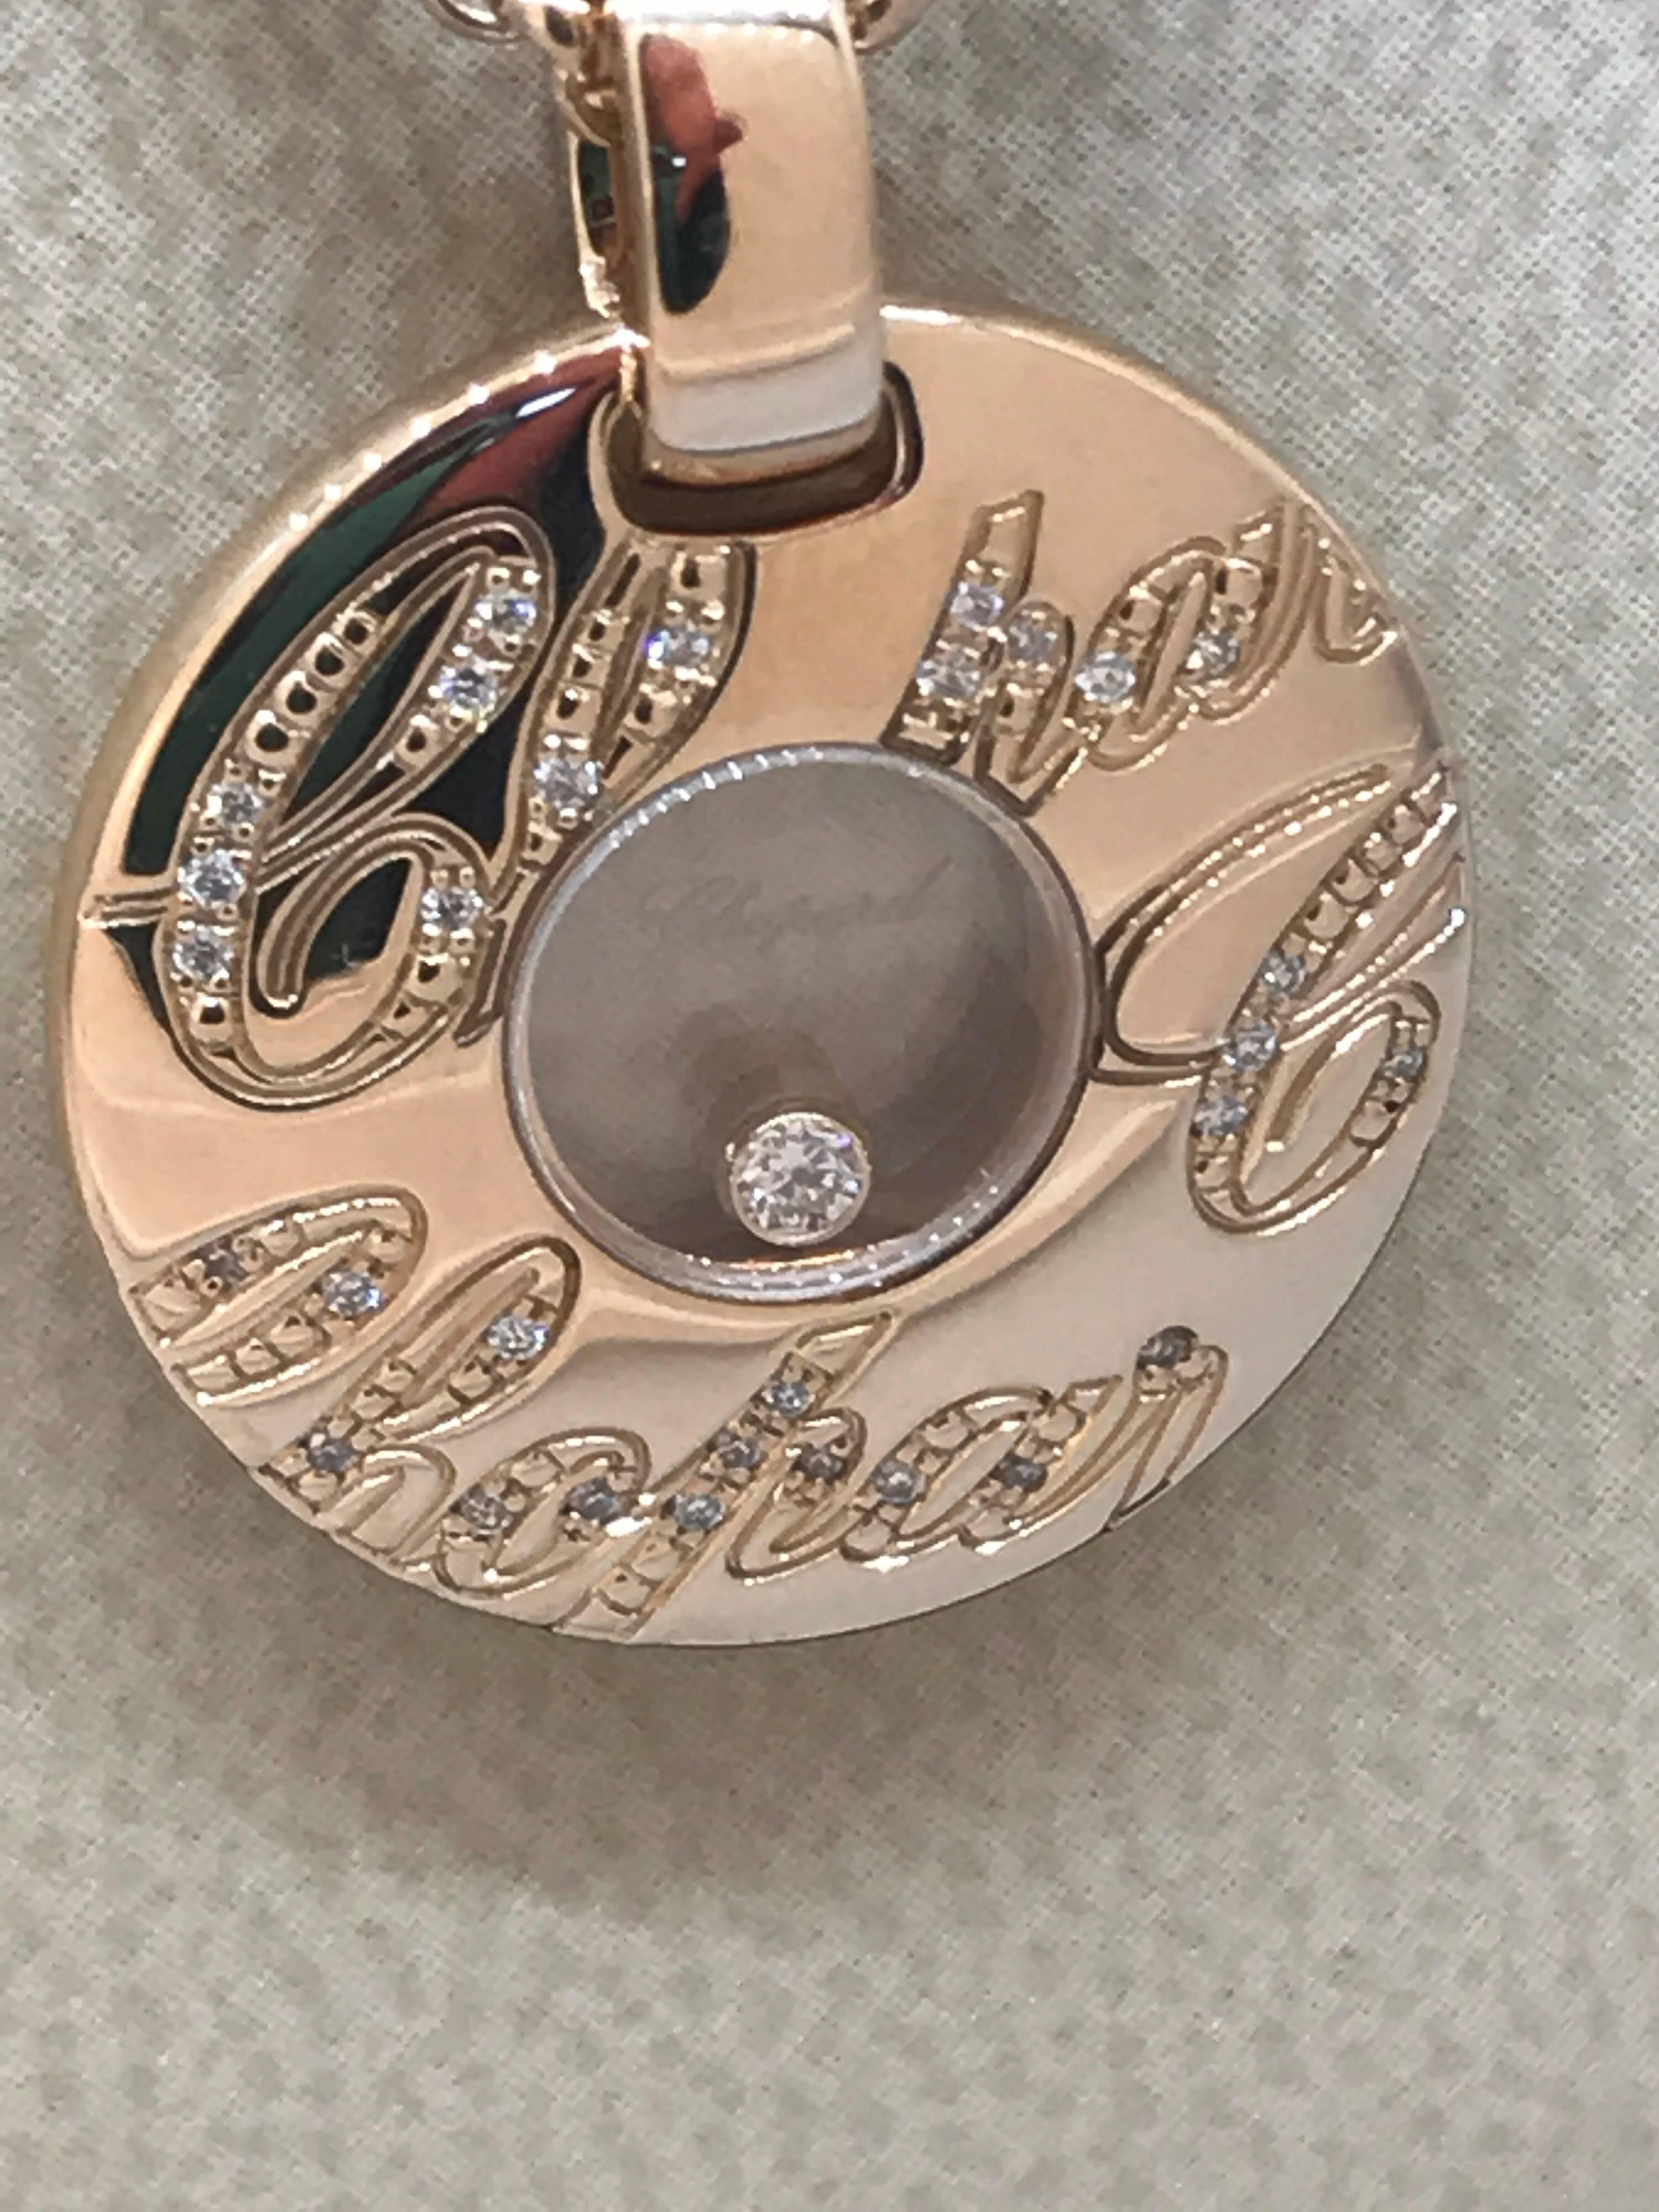 Chopard Chopardissimo Pendant / Necklace

Model Number 79/7760-5001

100% Authentic

Brand New

Comes with original Chopard box, certificate of authenticity and warranty and jewels manual

18 Karat Rose Gold

48 Diamonds on the Pendant (.11